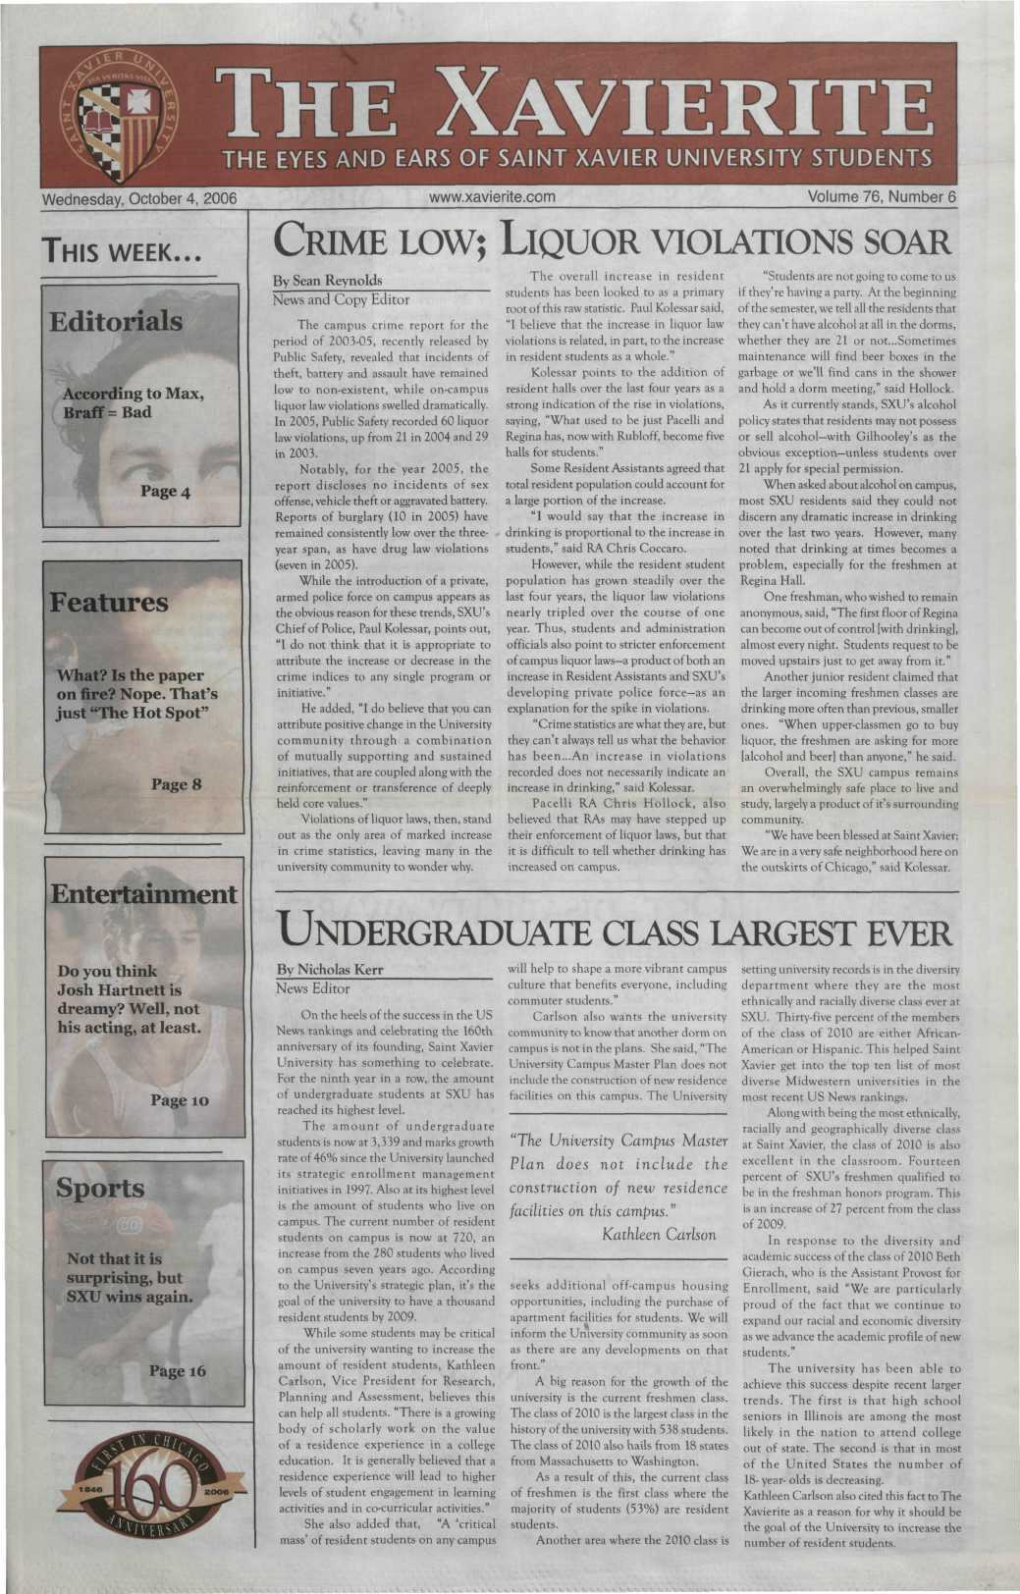 THE XAVIERITE the EYES and EARS of SAINT XAVIER UNIVERSITY STUDENTS Wednesday, October 4, 2006 Volume 76, Number 6